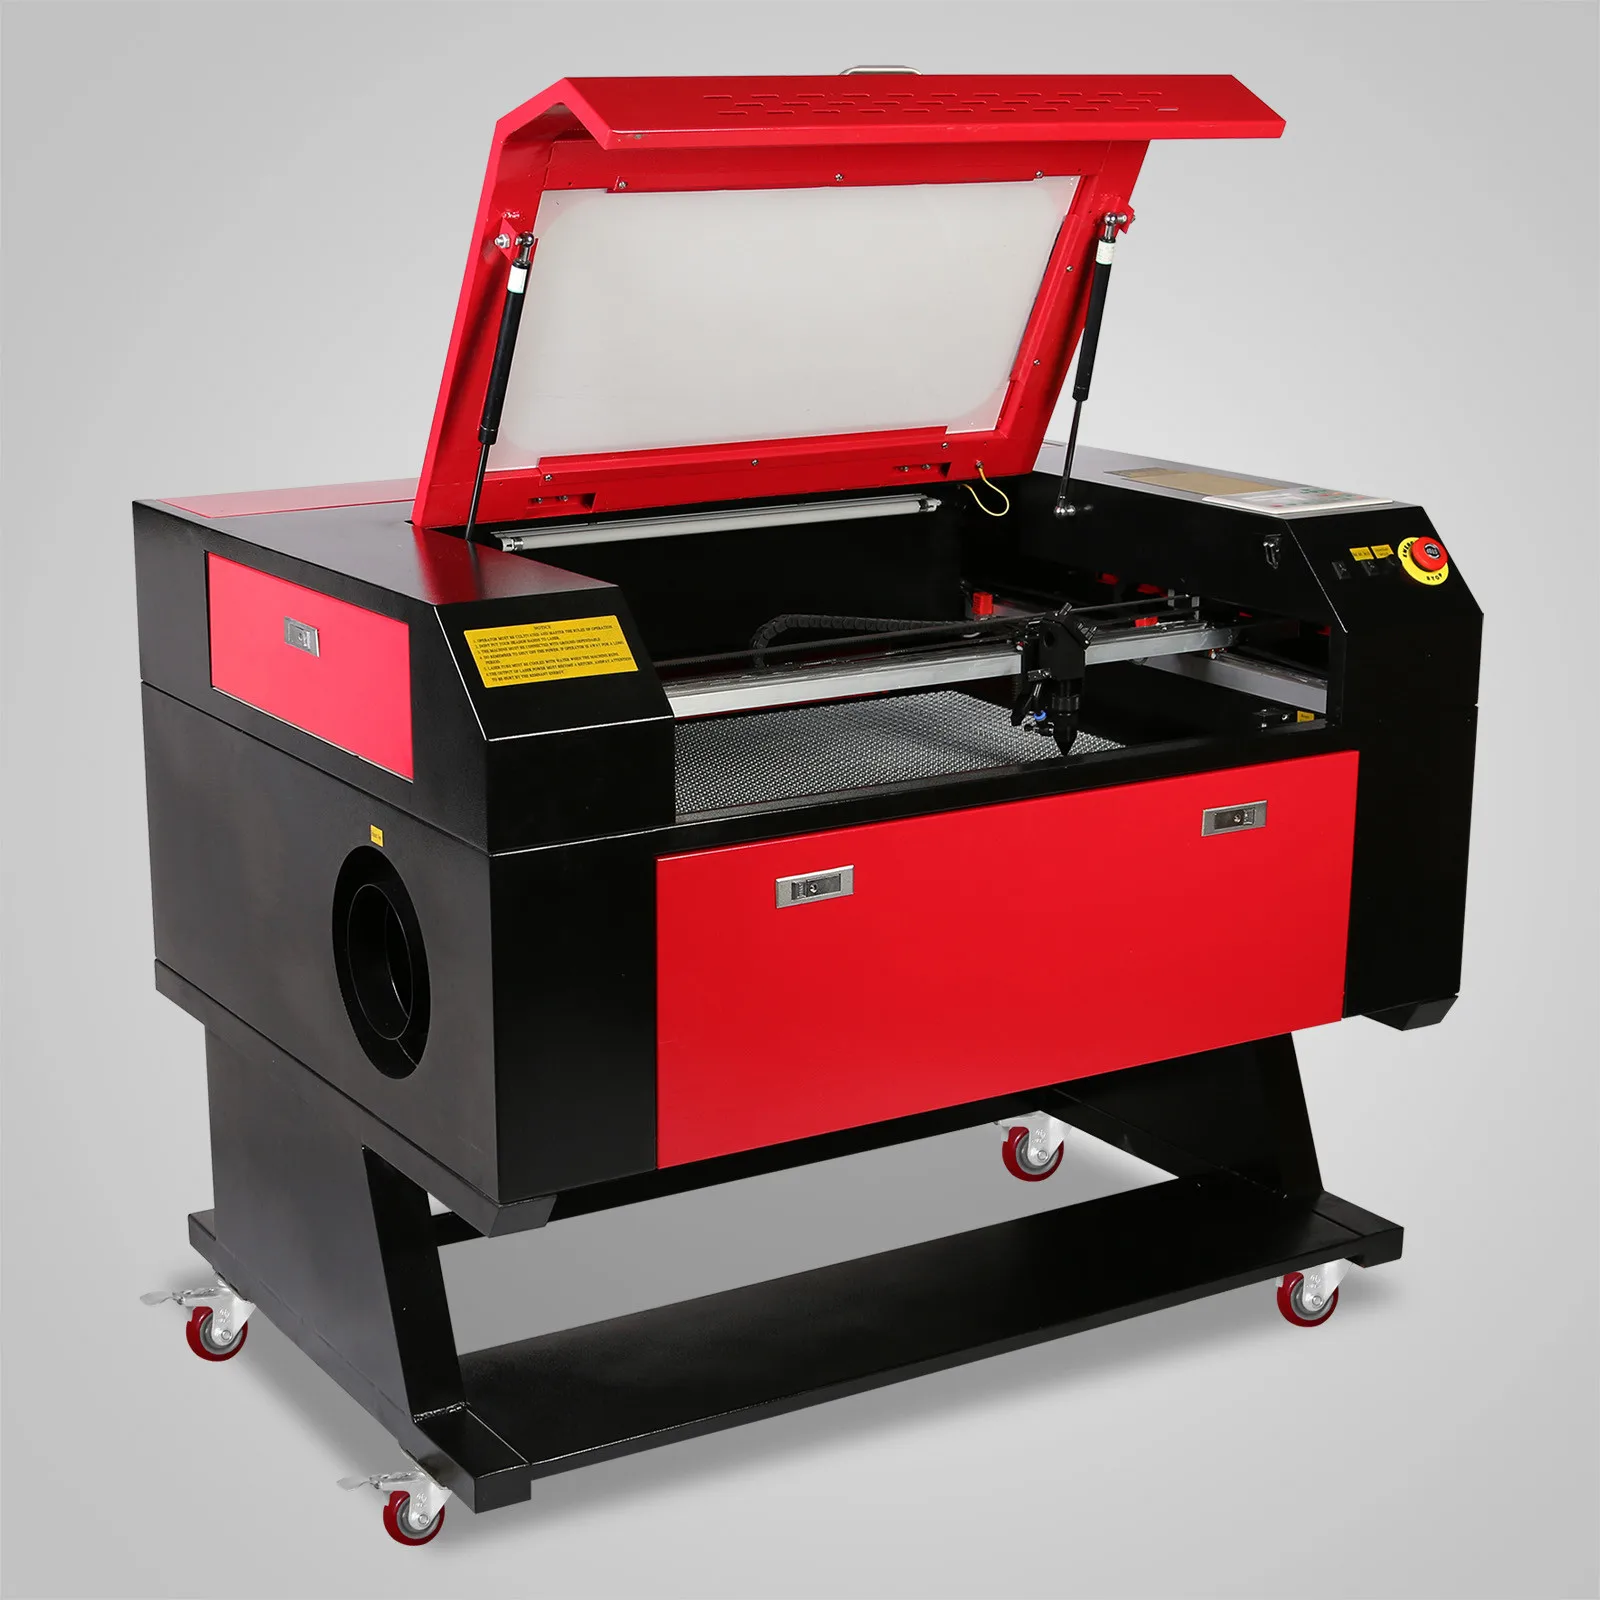 Details about   80W RDworks Co2 Laser Cutting&Engraving Machine 700*500mm With Motorized Table 